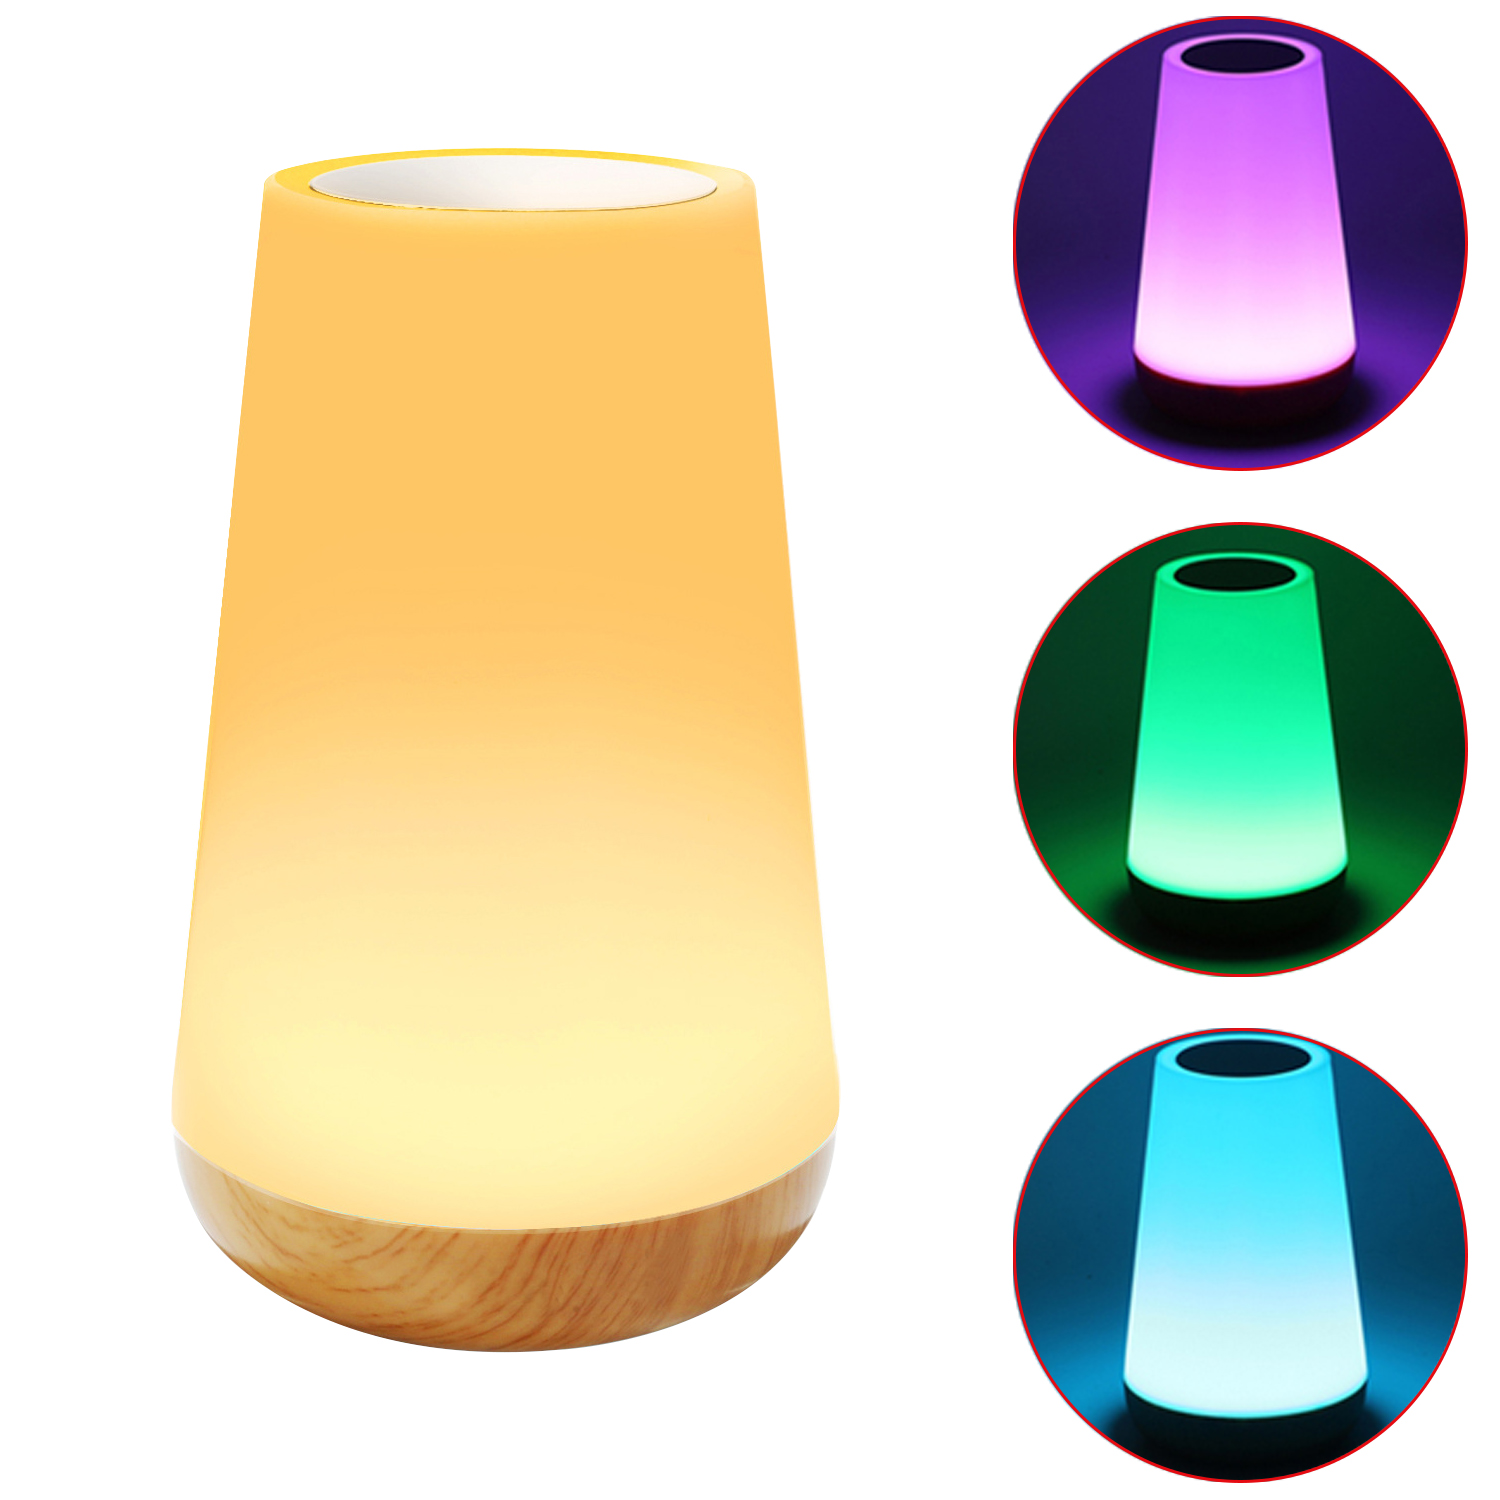 Night Light RGB Remote Control Touch Dimmable Lamp Portable Table Bedside Lamps USB Rechargeable Night Lamp